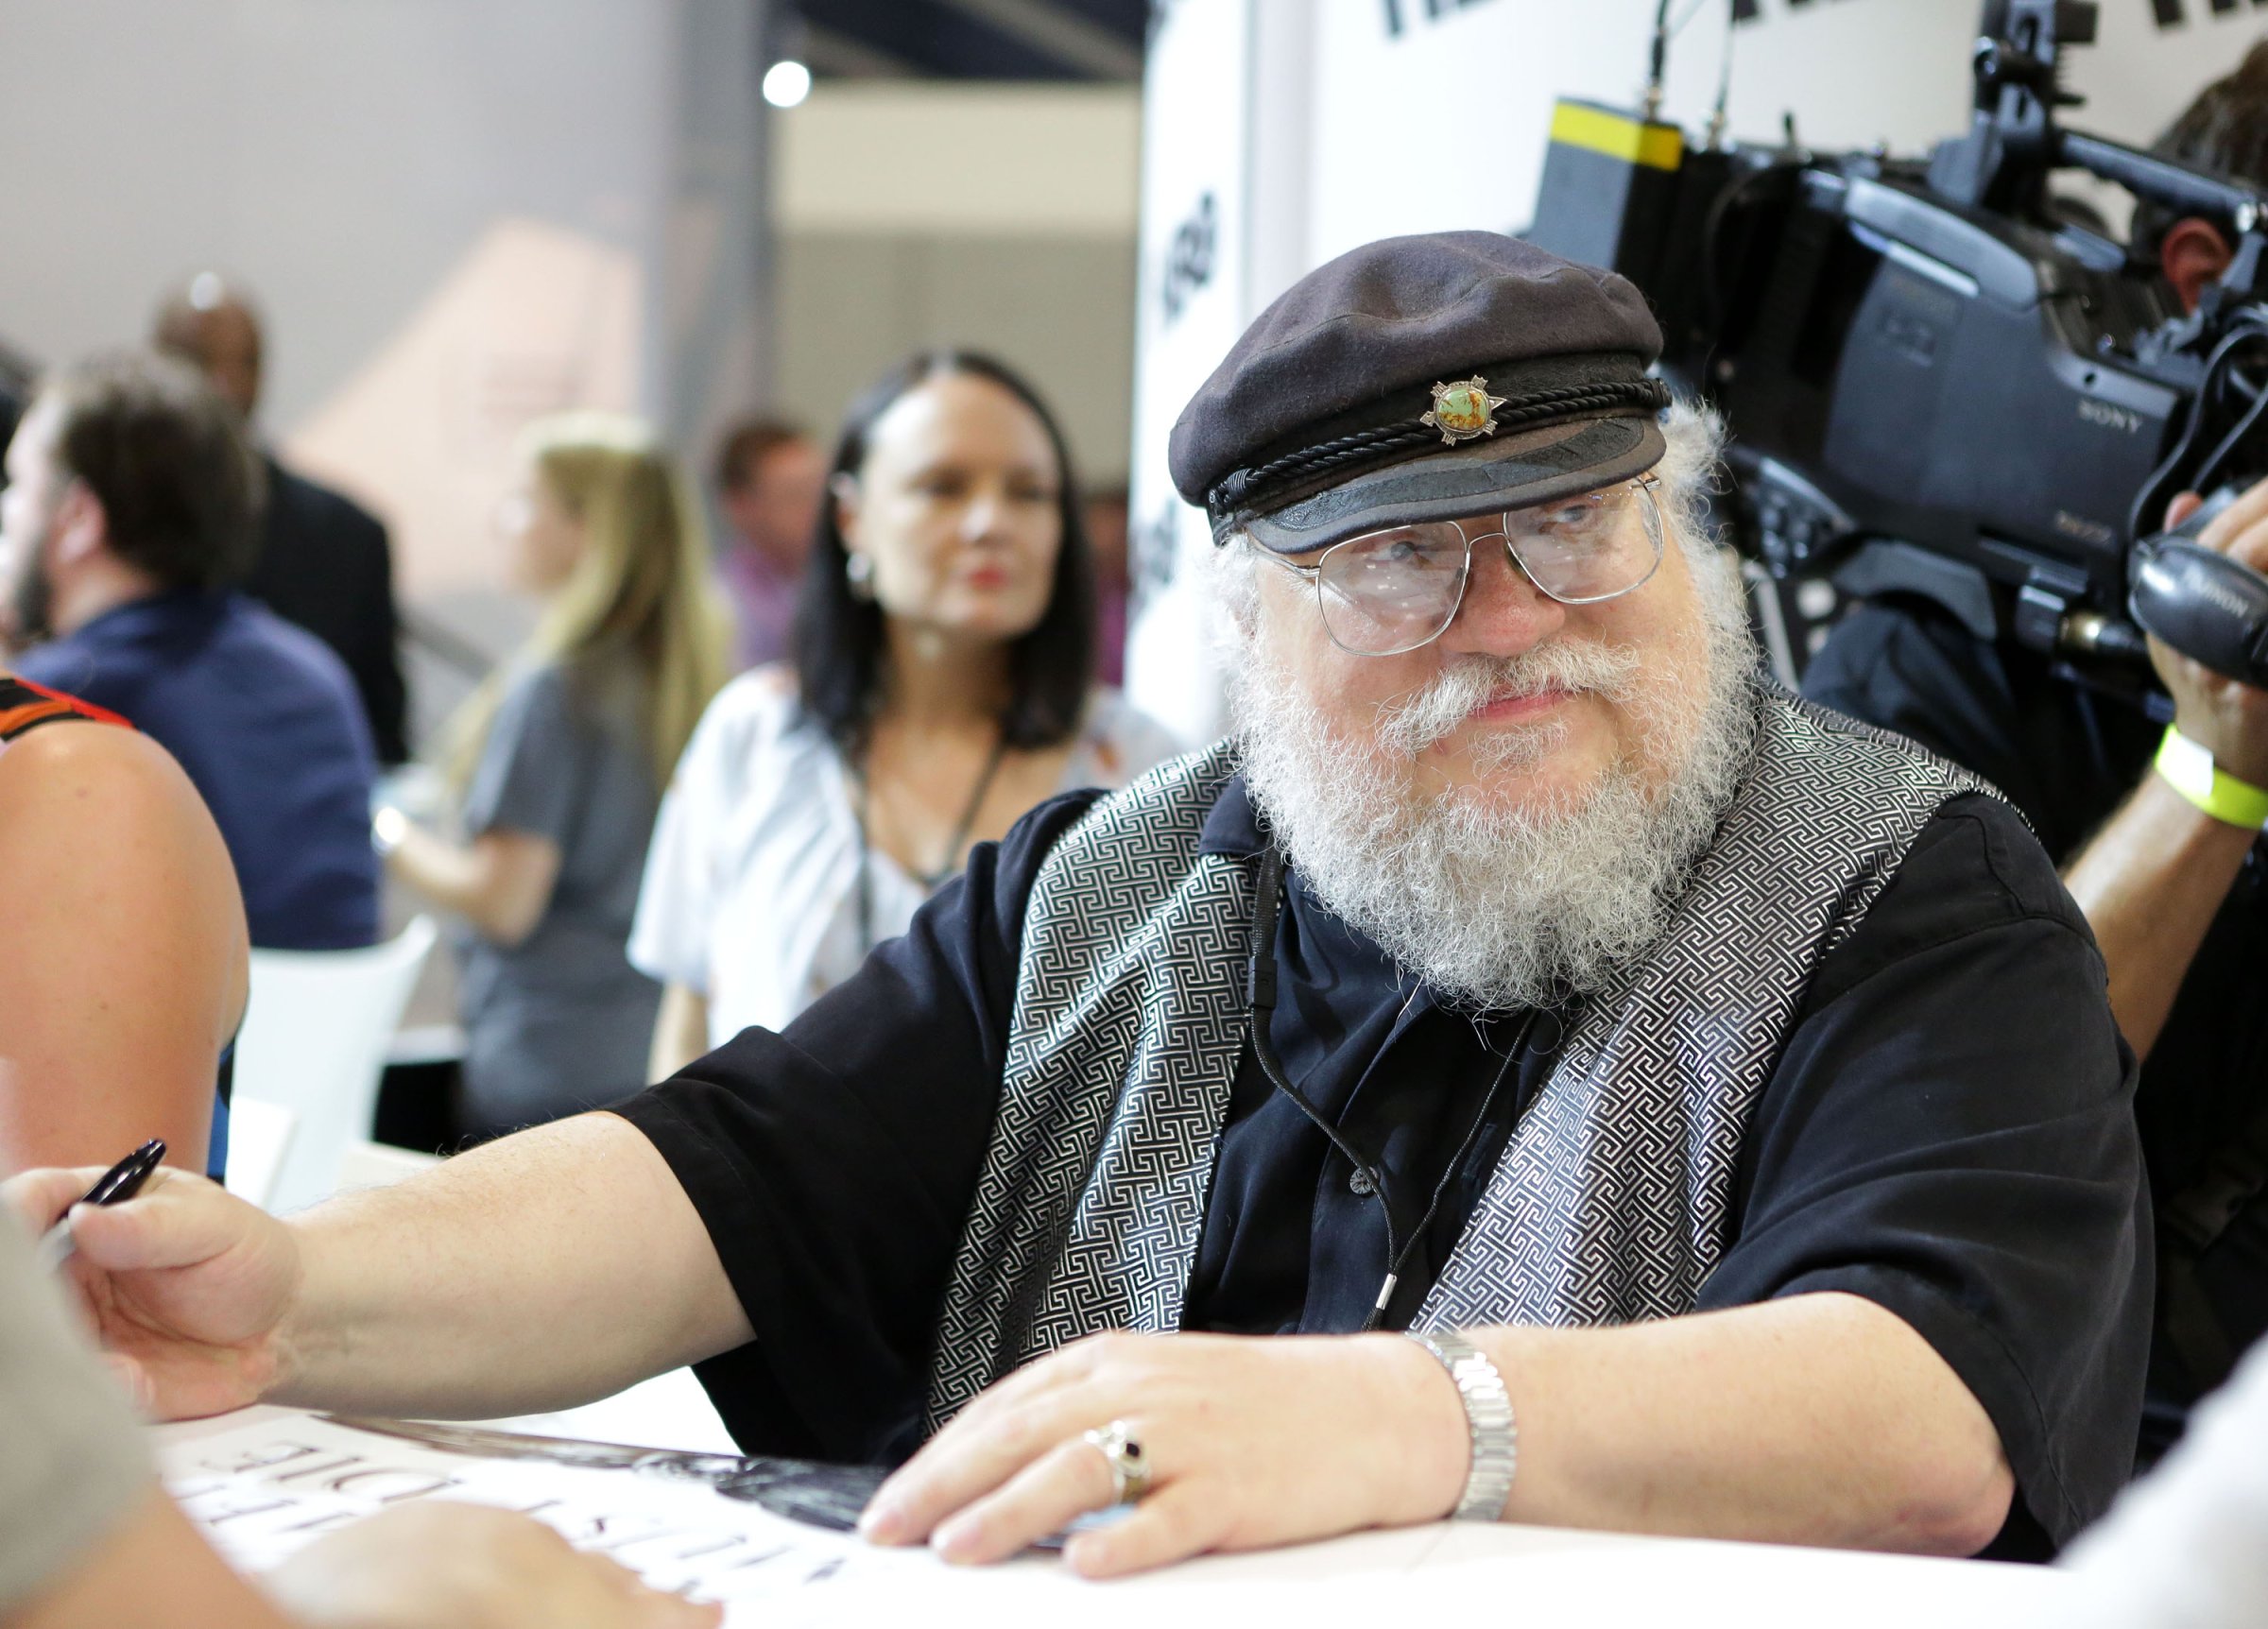 "Game of Thrones" Autograph Signing - Comic-Con International 2014